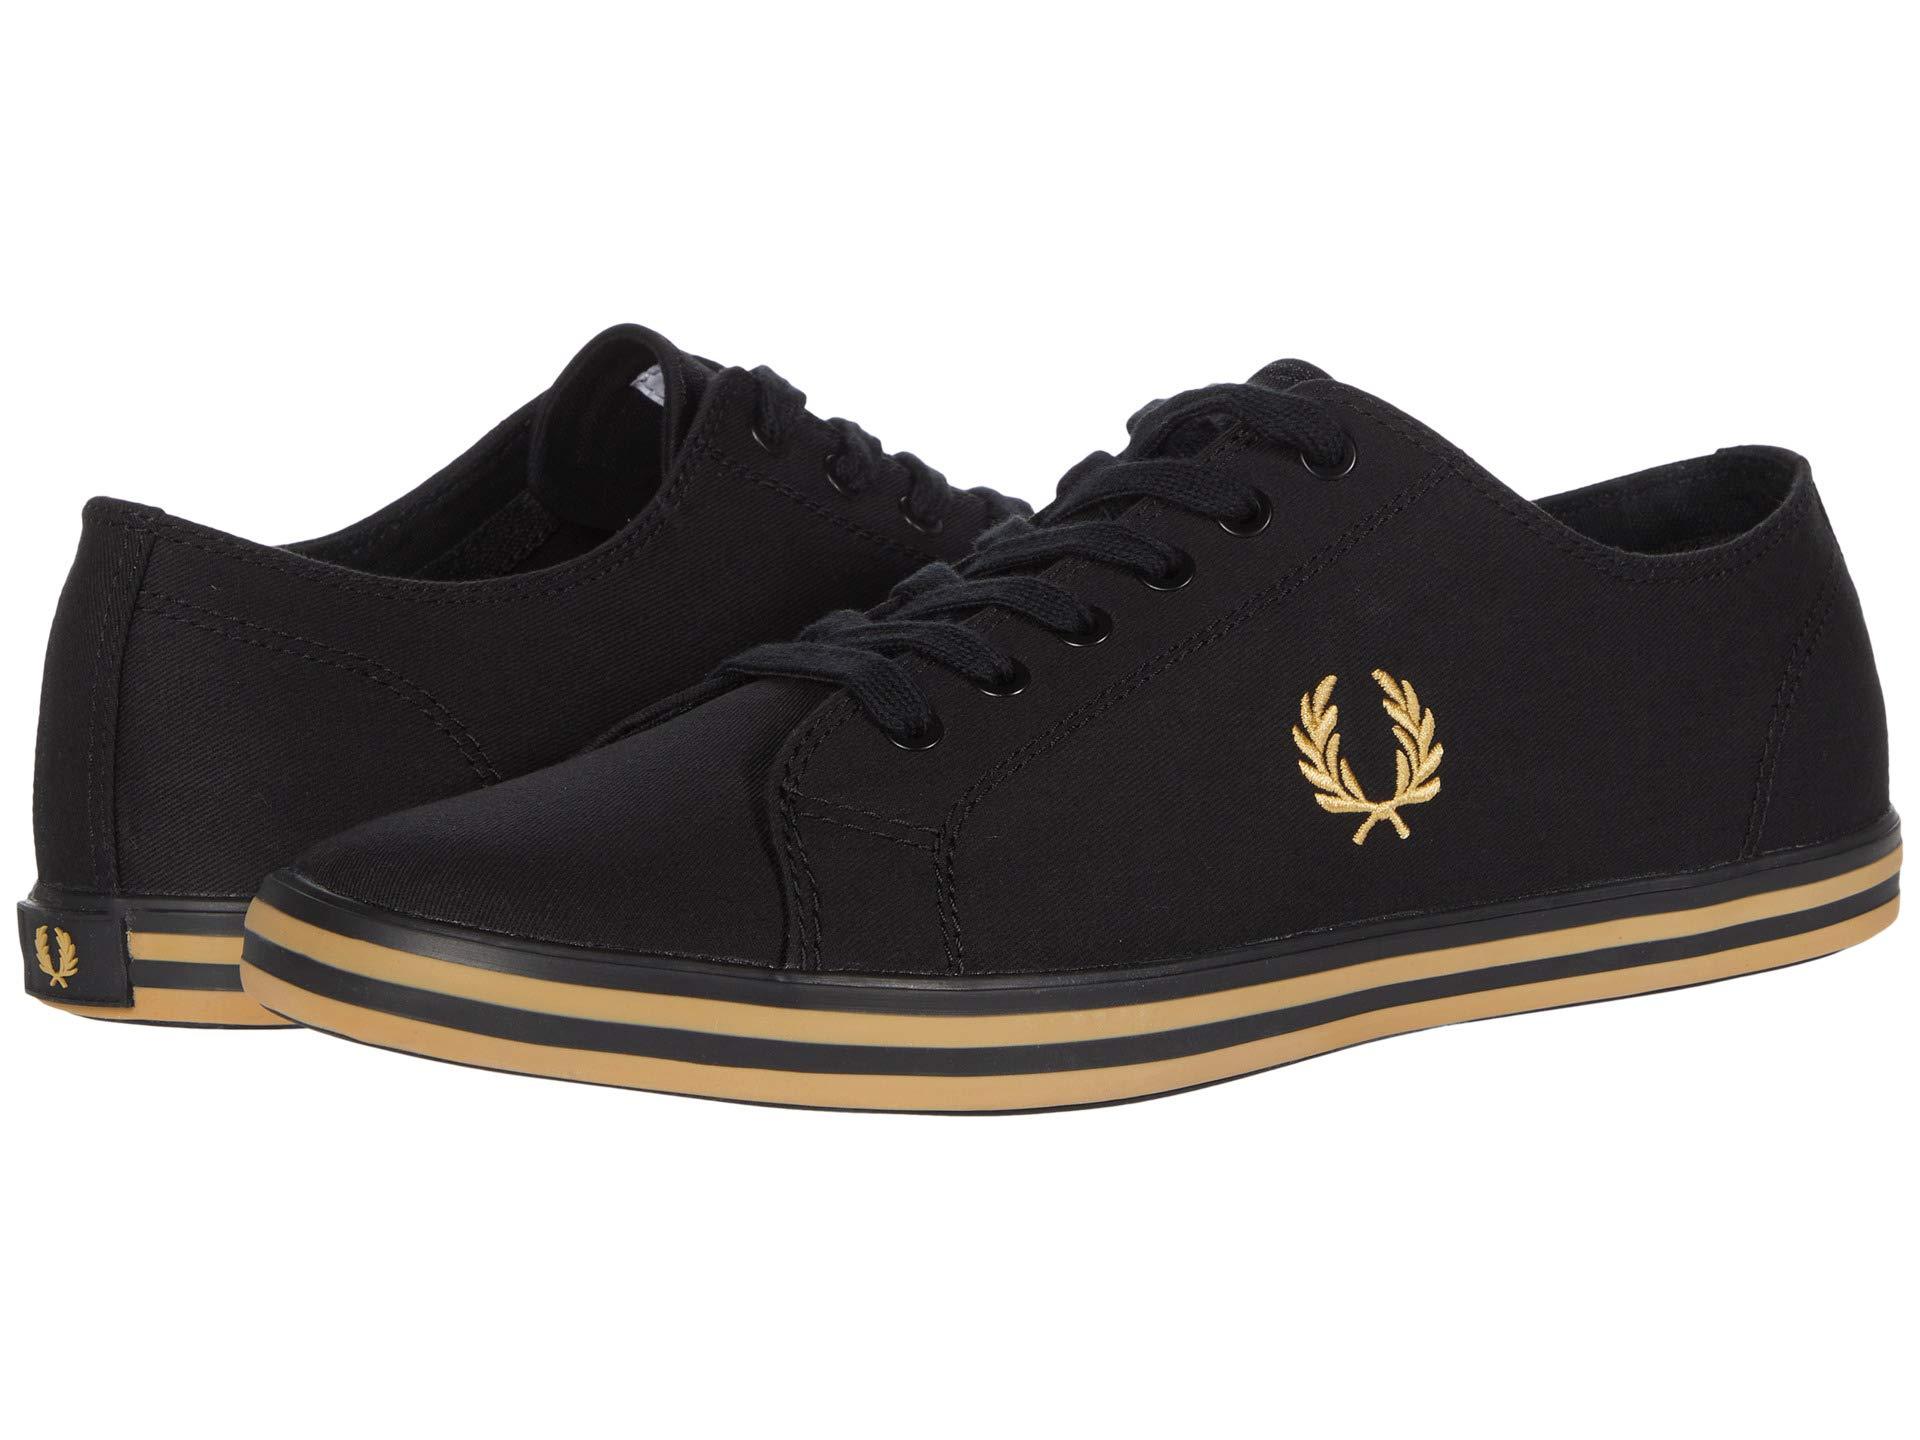 Fred Perry Canvas Kingston Twill in Black for Men - Lyst